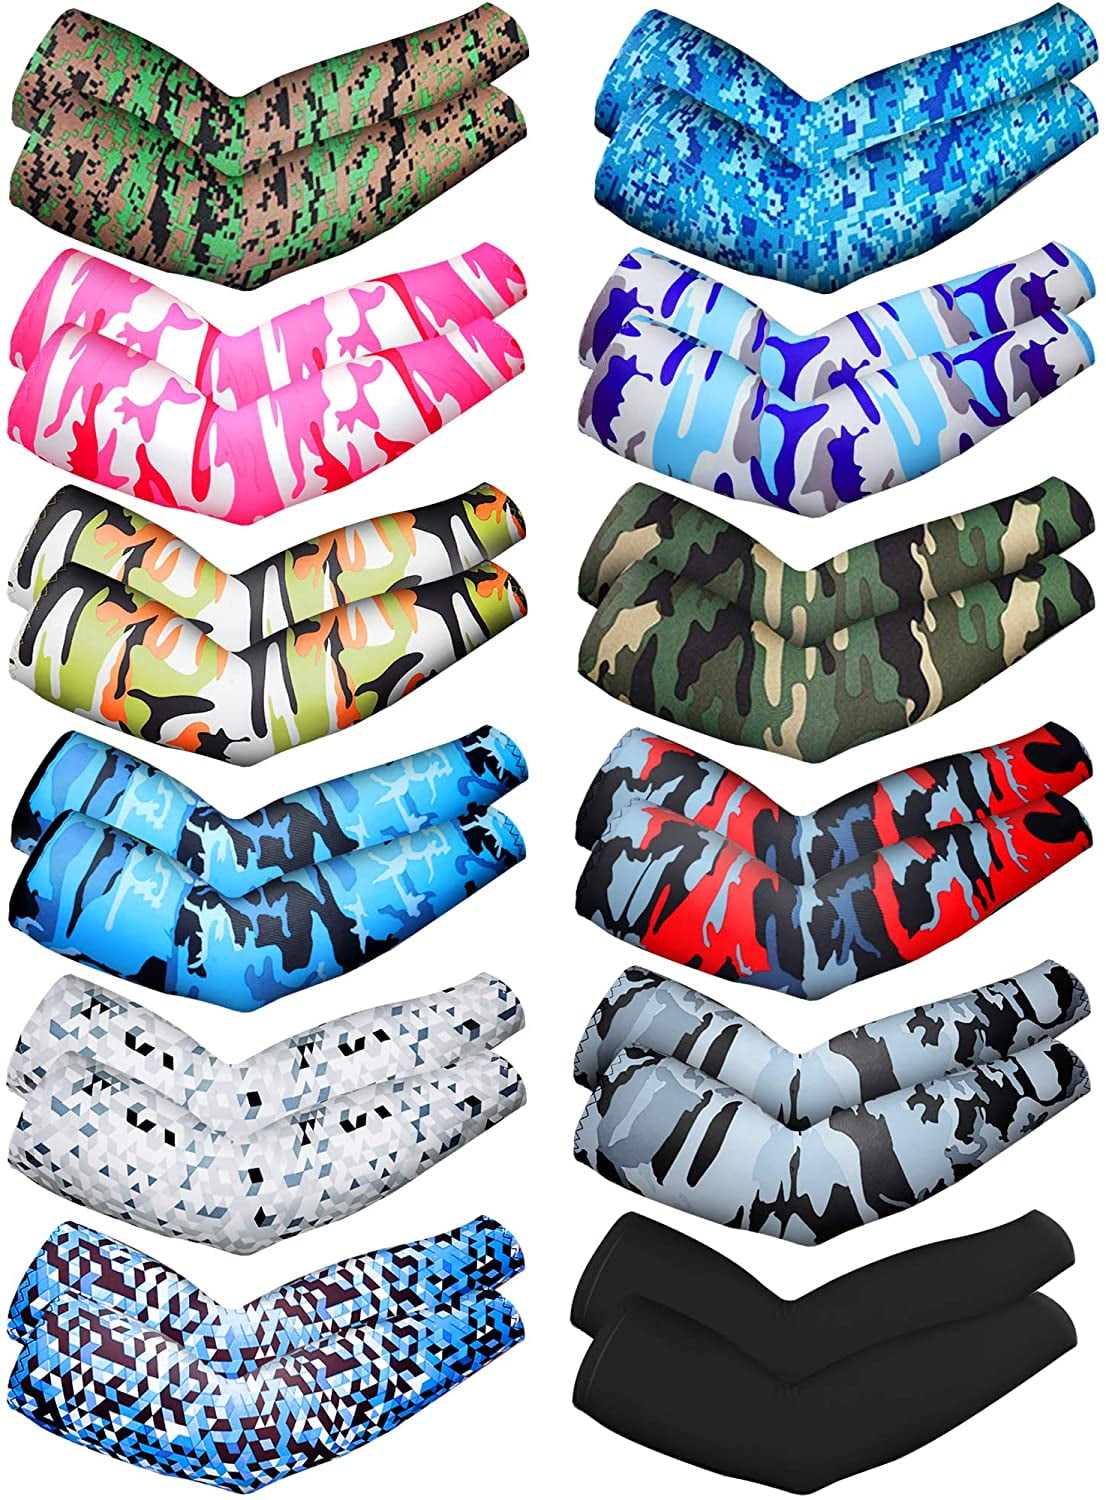 UV Arm Sleeves Perfect for Cycling Driving Running Basketball Football fr Summer 